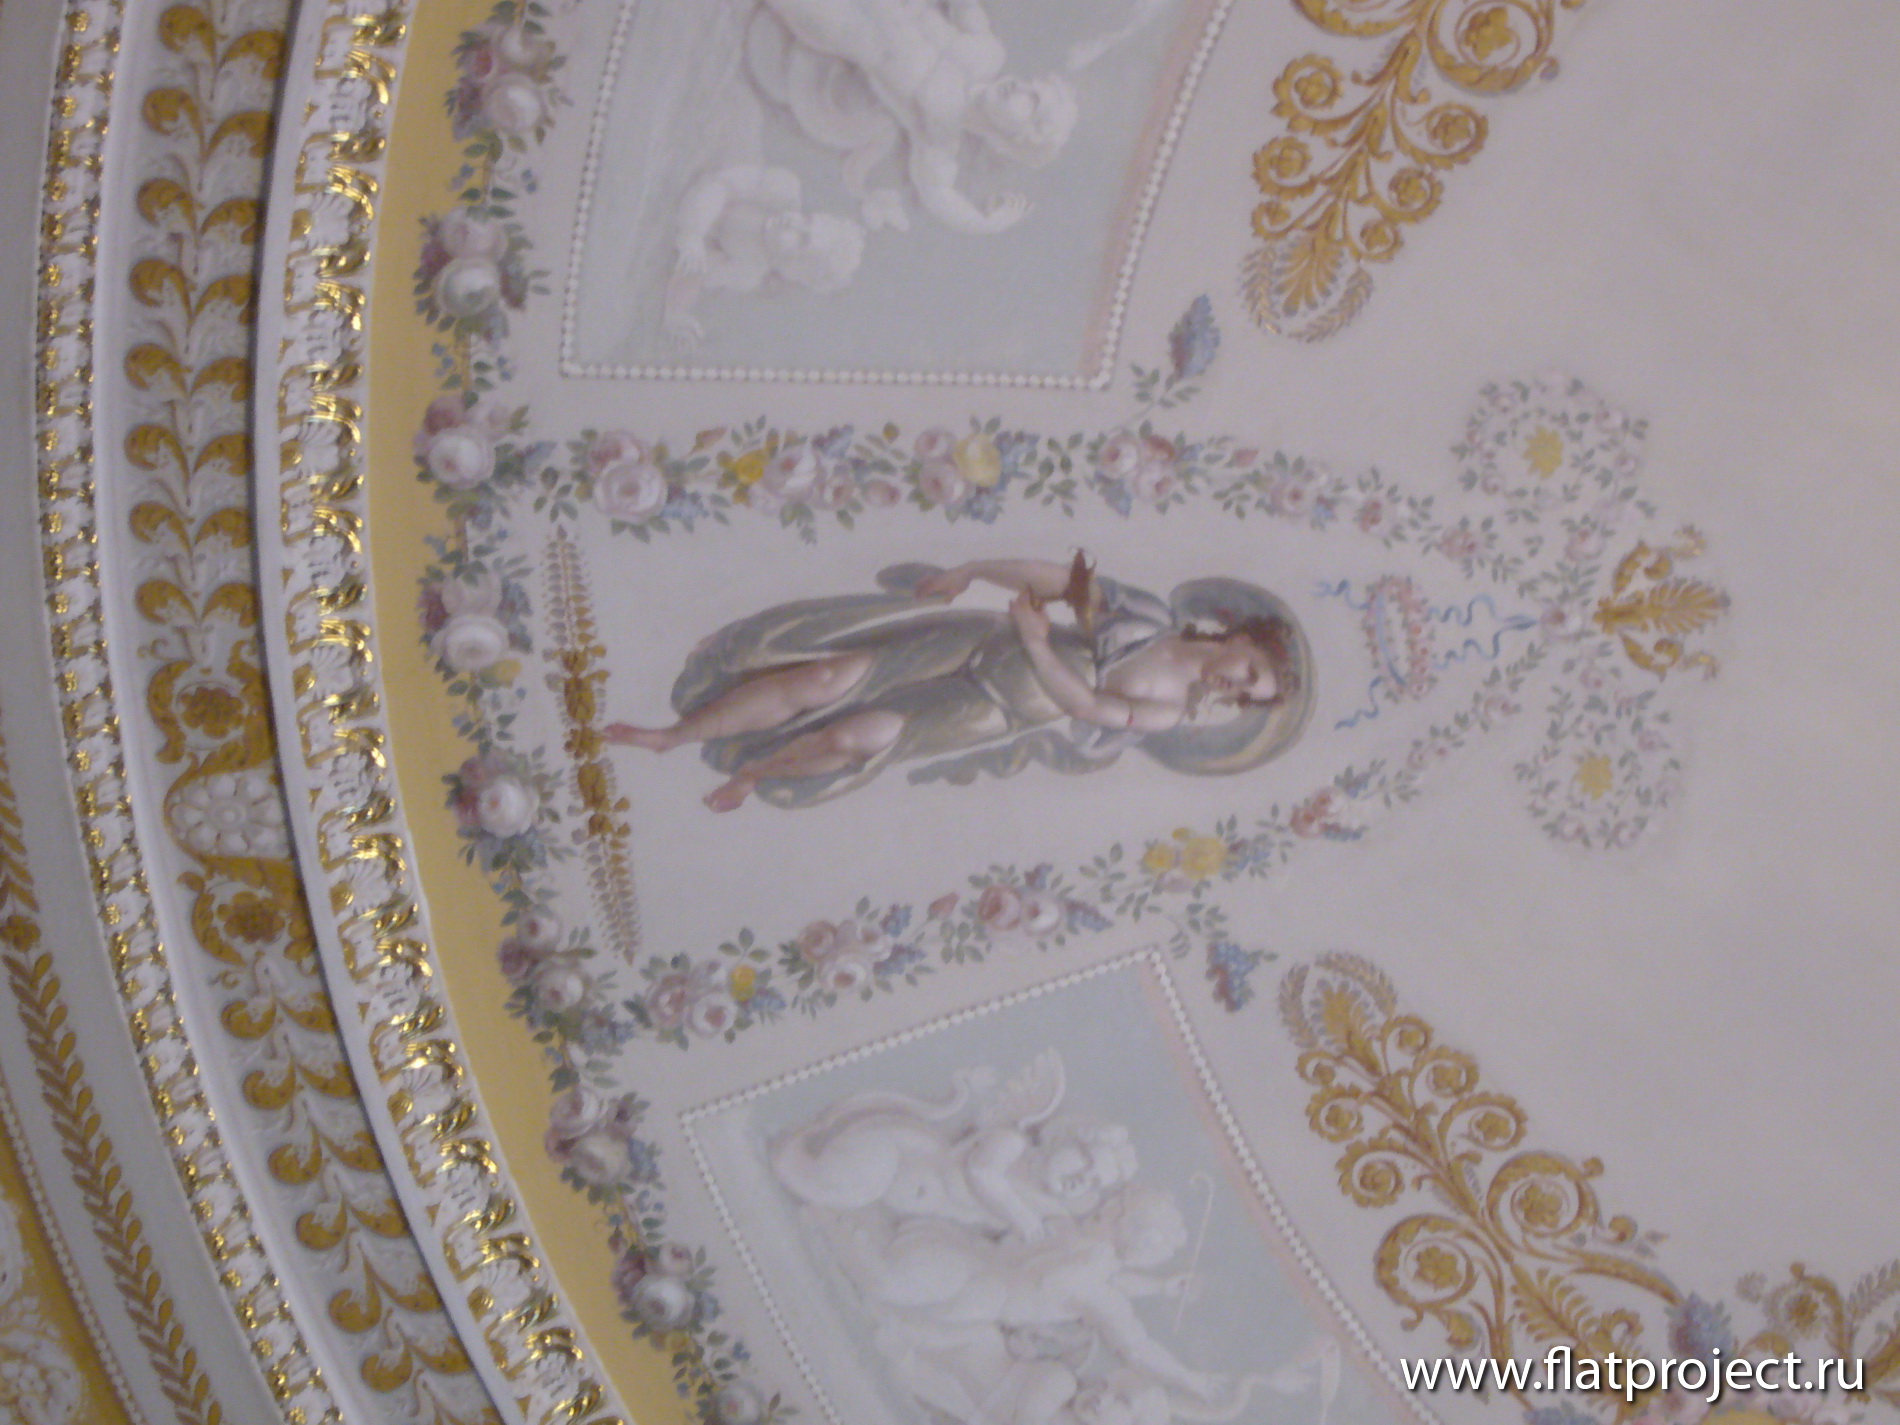 The State Russian museum interiors – photo 46